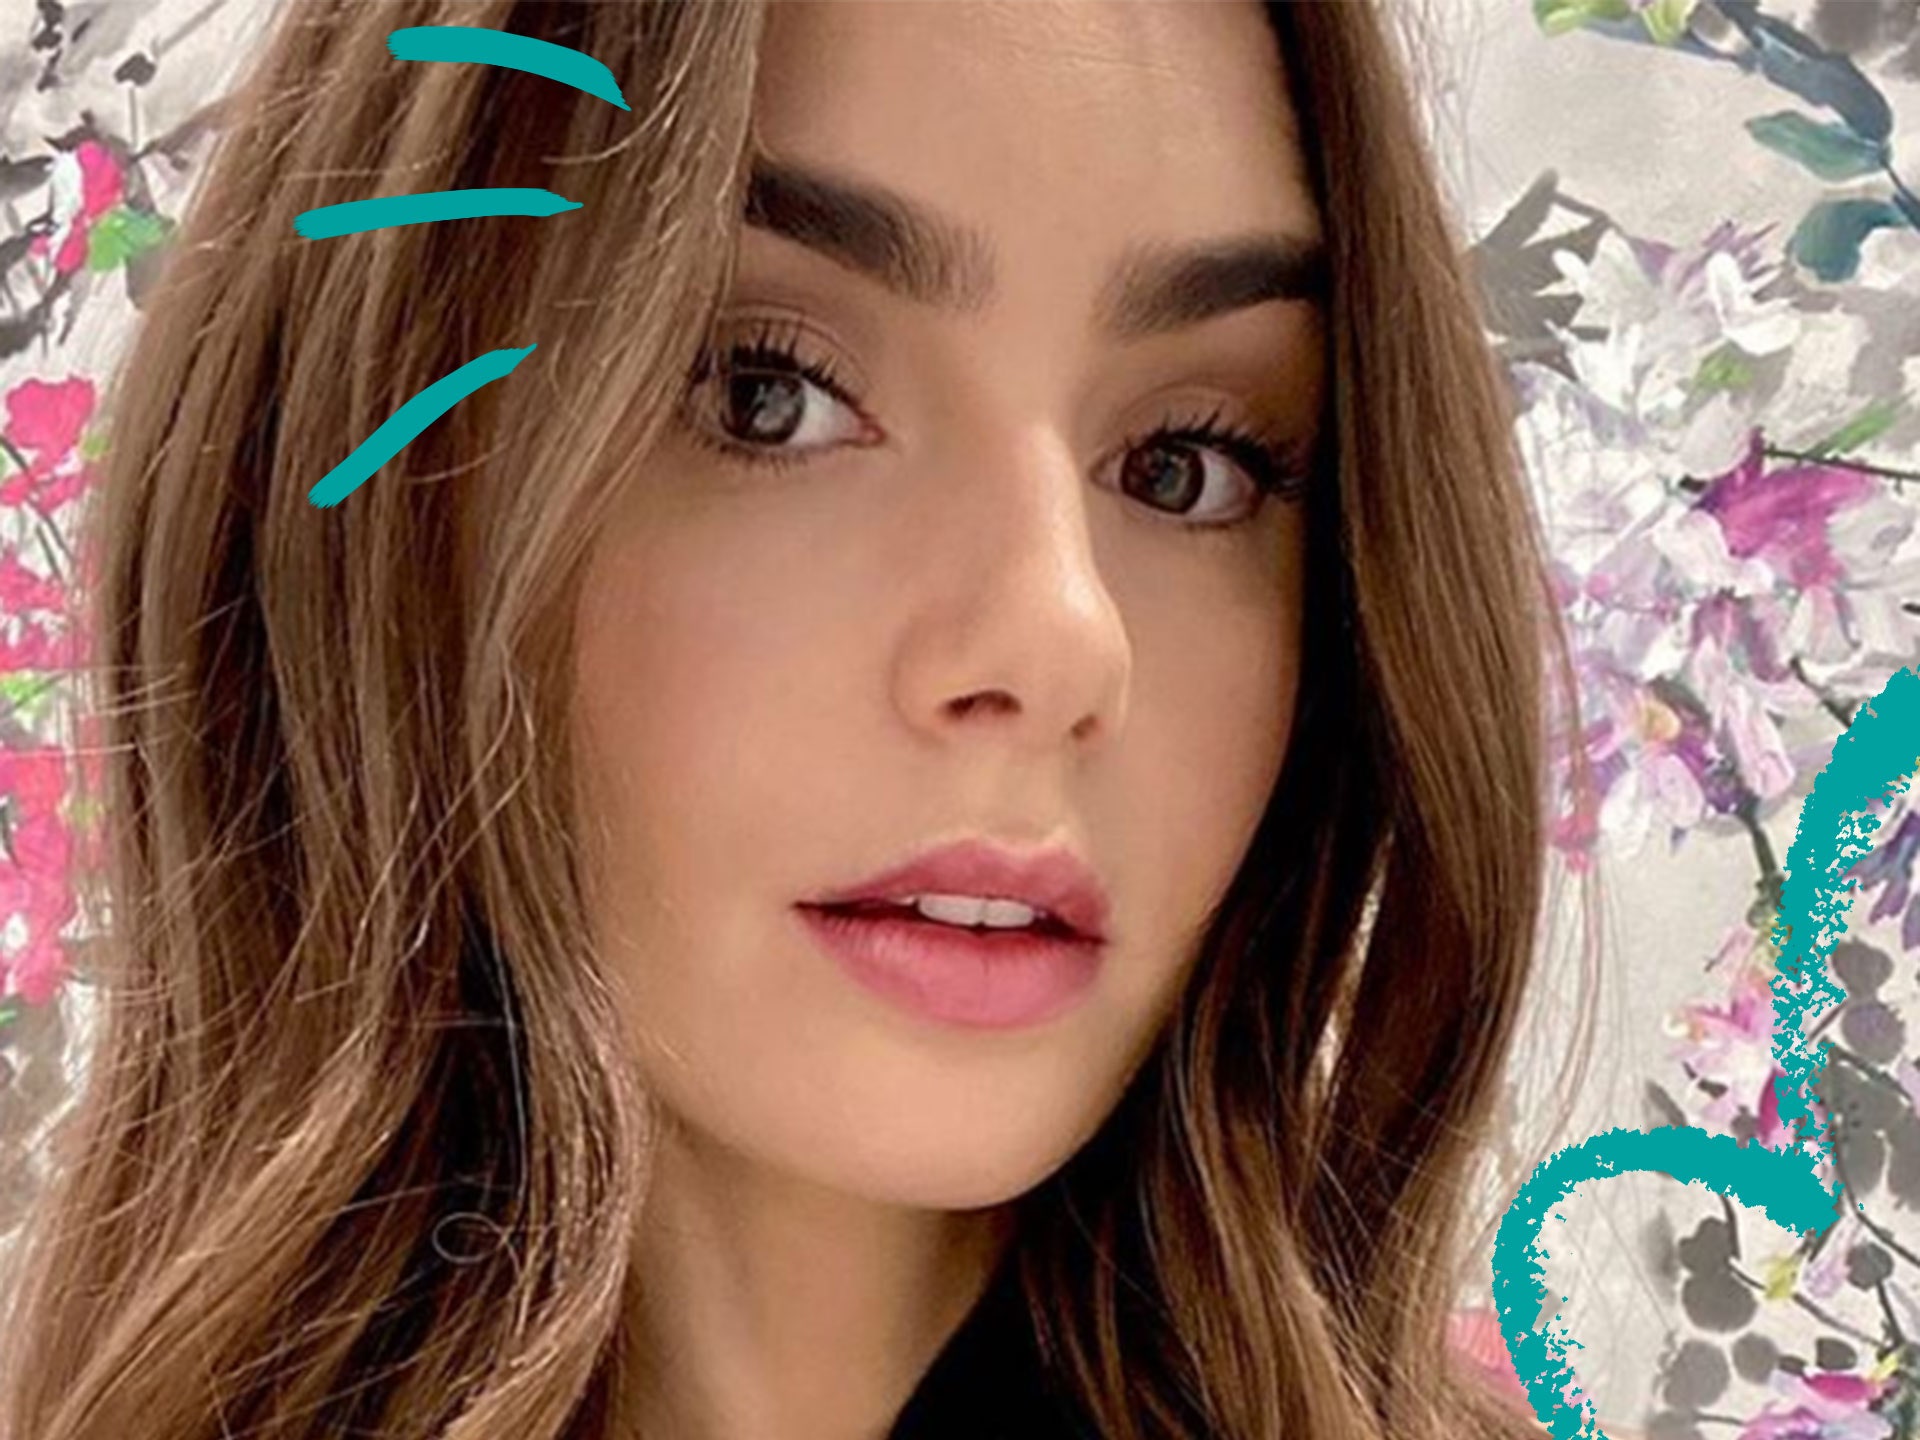 Lily Collins Stunning Cover For Shape Magazine Wallpapers